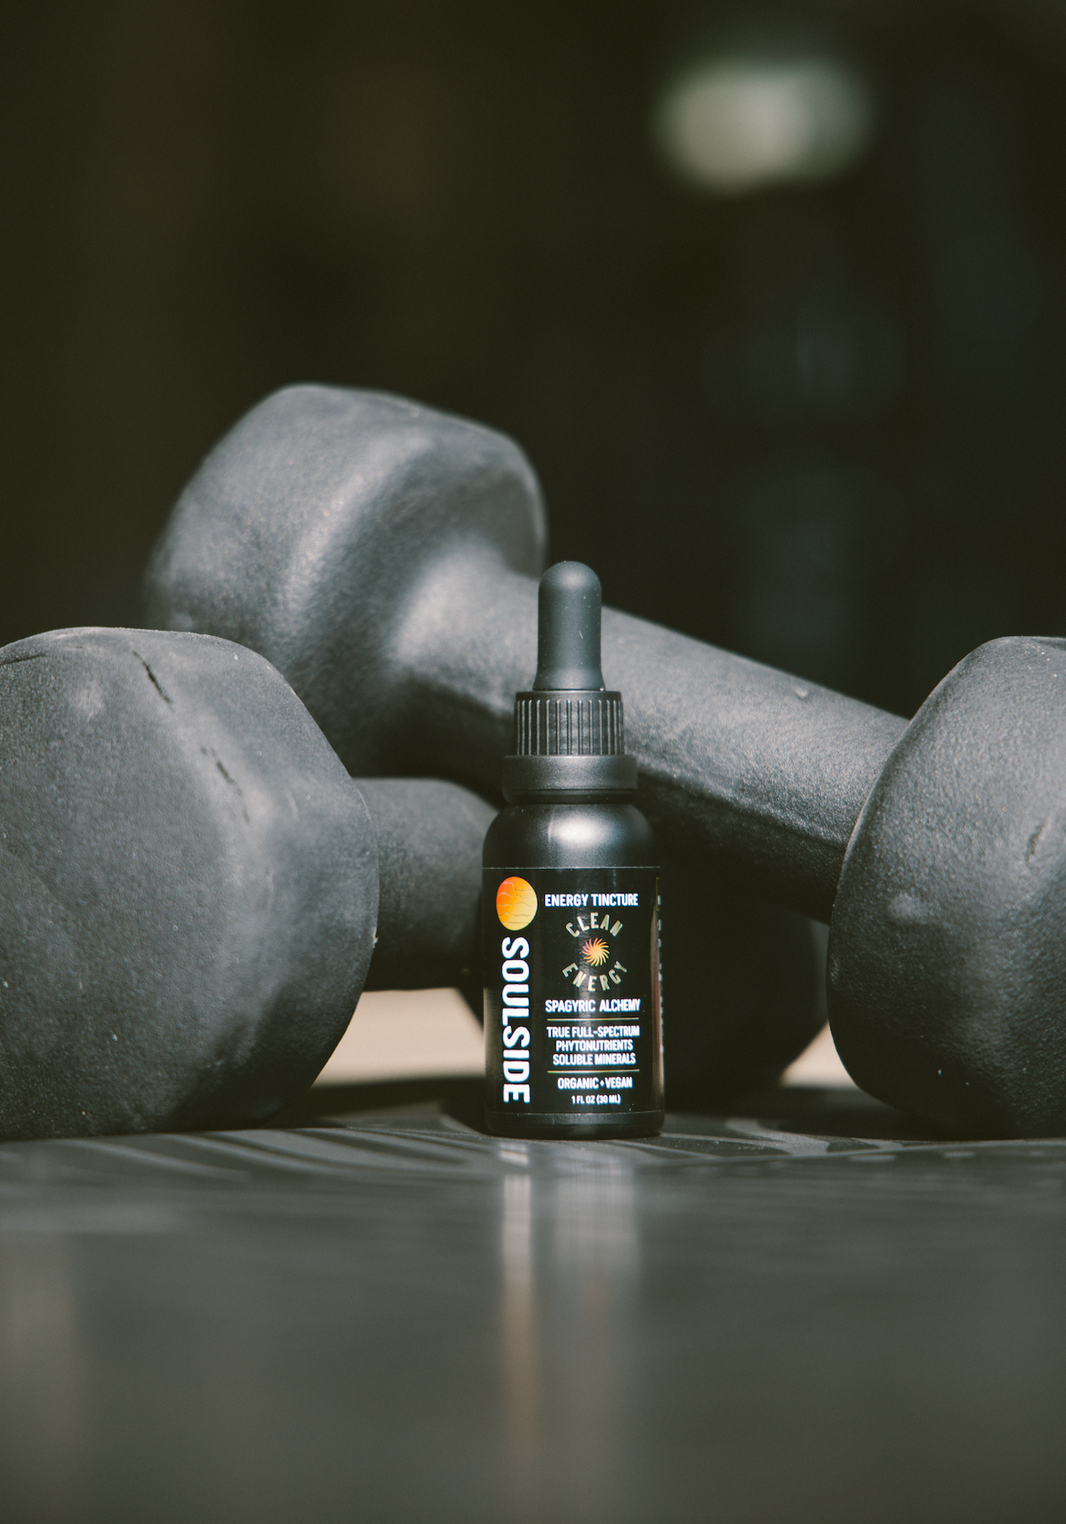 Image of Soulside Clean Energy tincture, an herbal tincture for energy, focus, athletic performance, endurance, in front of gym weights, implying its use as a pre-workout solution.